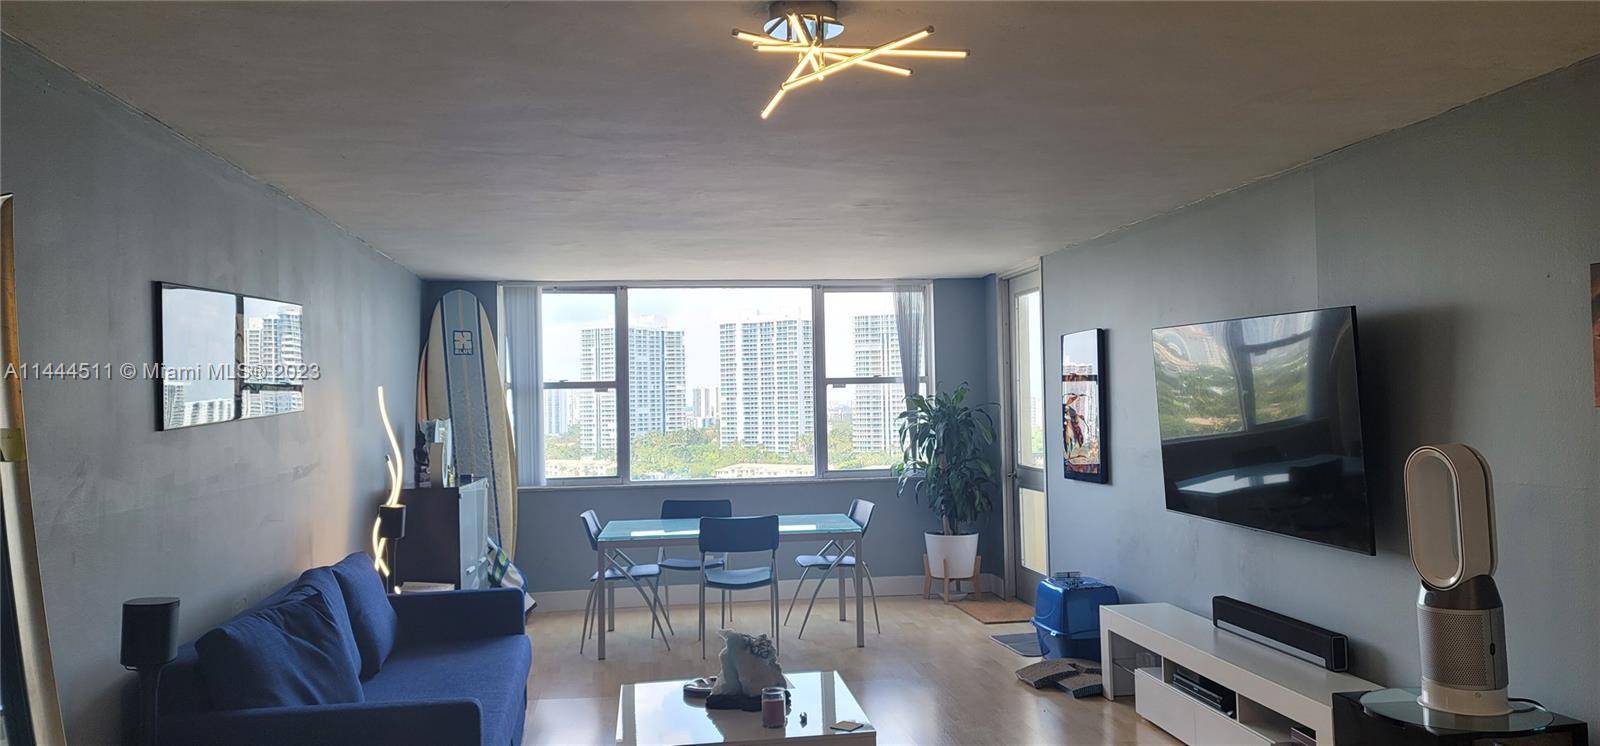 Needs TLC Best value for 1bed 1bath on the beach in Hallandale Beach !